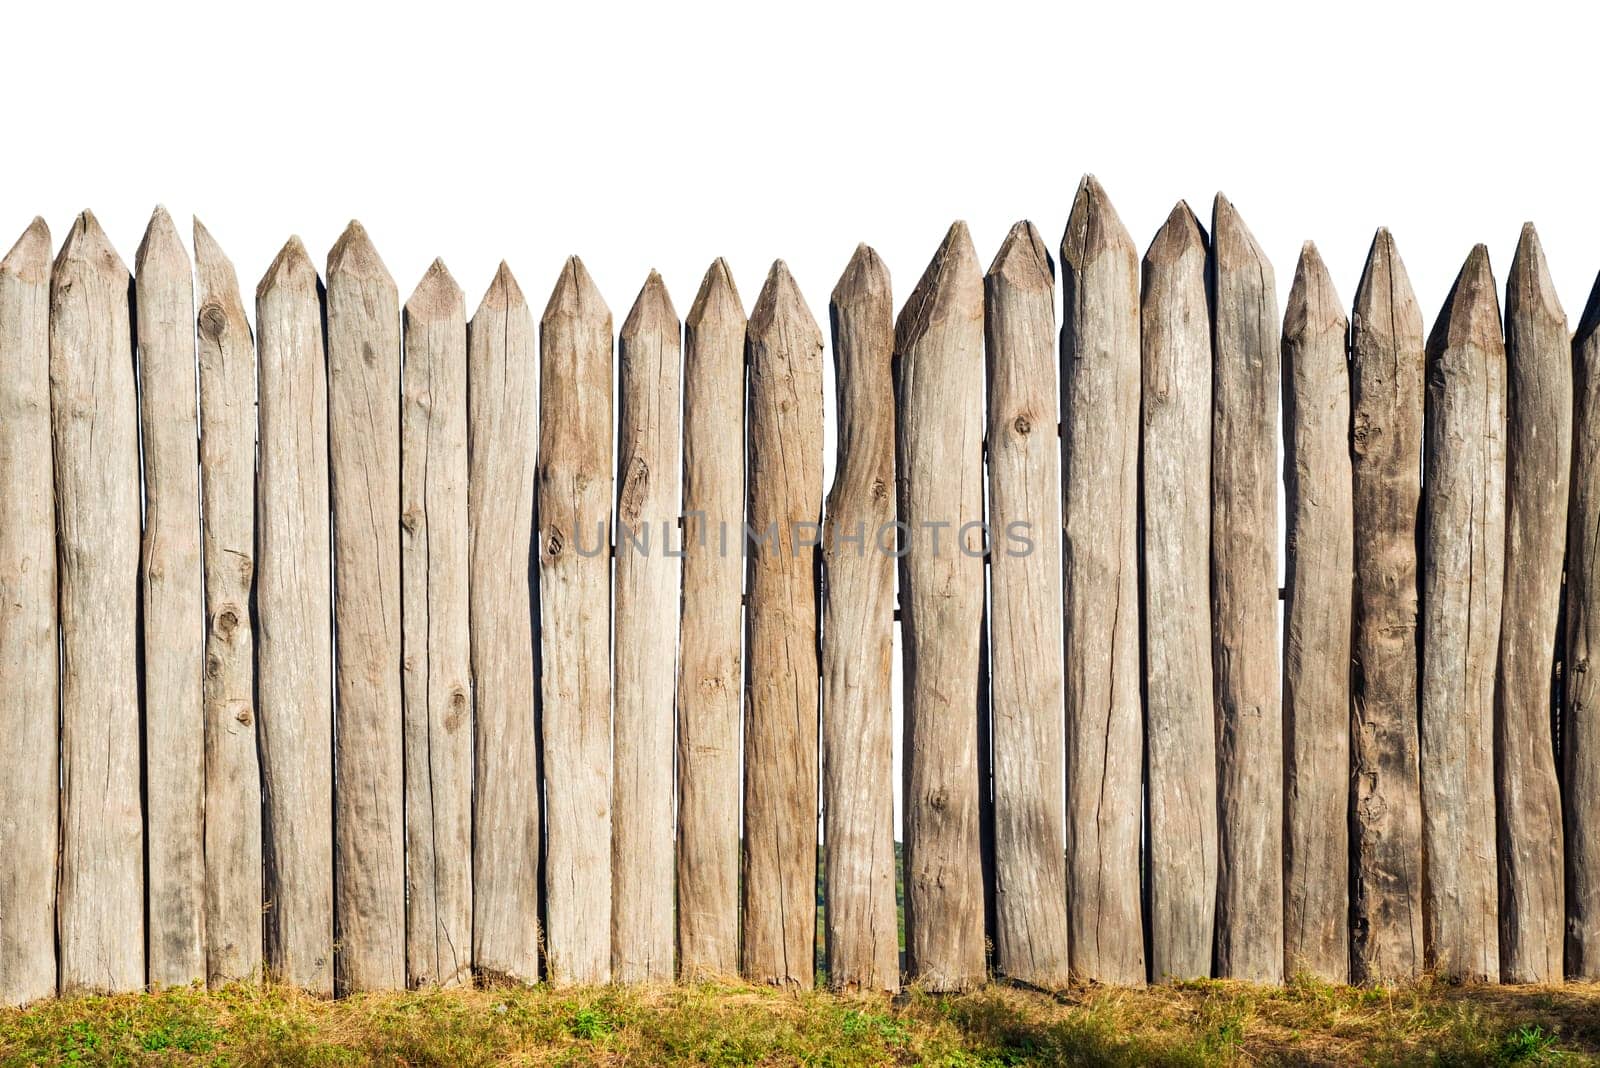 Wooden fence from logs isolated on white background. Fence from a stockade fence on white.